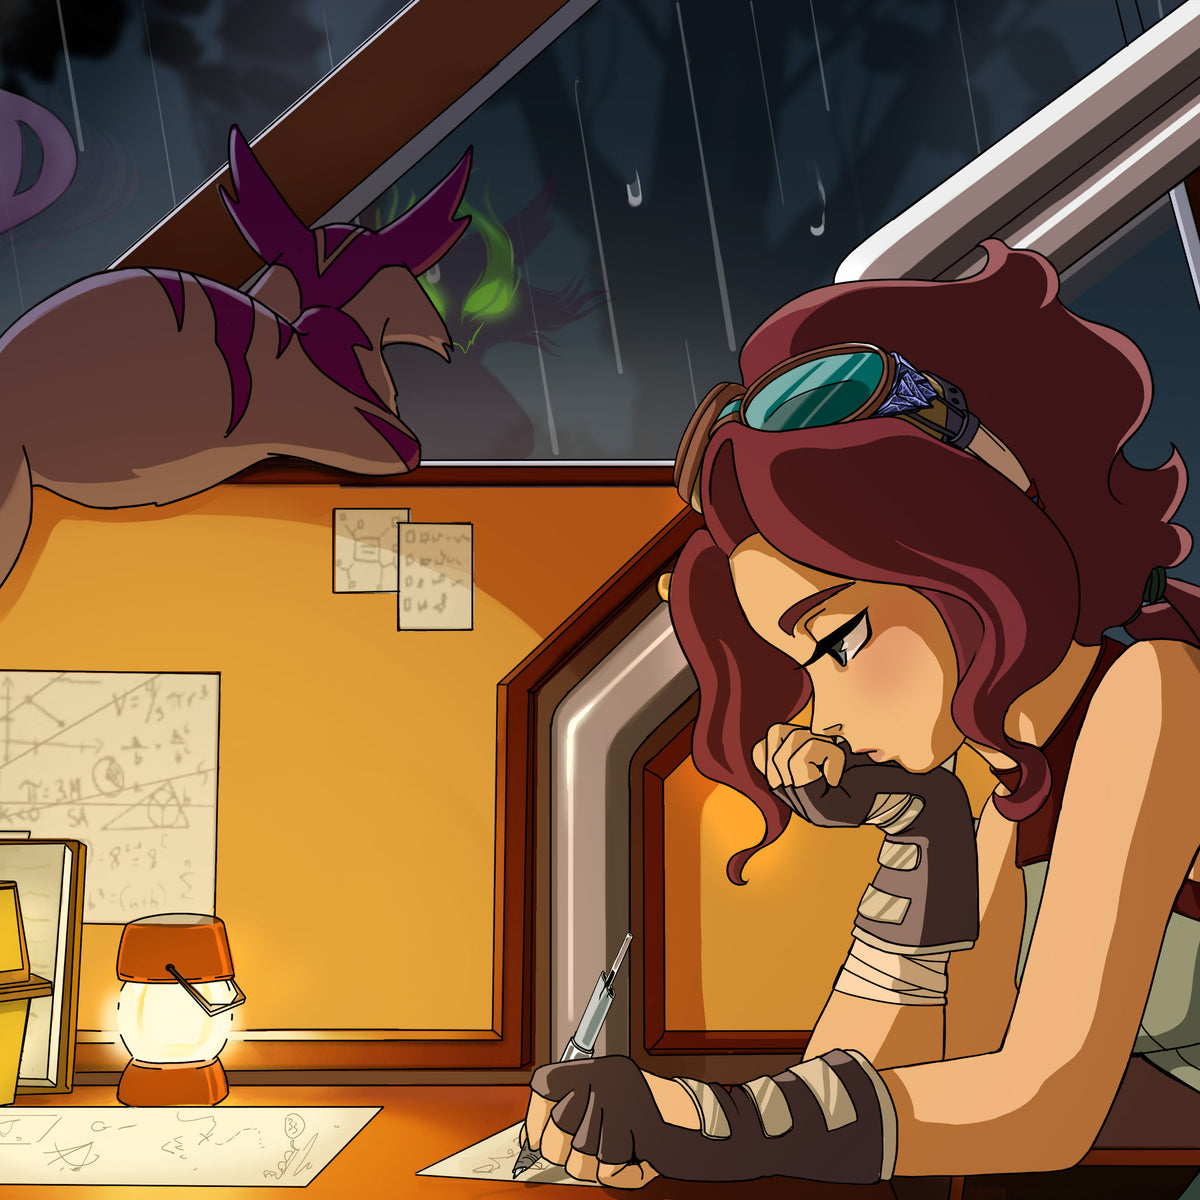 An image of the feminine conductor and Schrödinger peacefully sitting in the train. It is night, it is raining, and the conductor's pose is reminiscent of the "Lofi Girl." The image links to a twitter post, https://twitter.com/TEOTLNewAge/status/1545509511938641923.